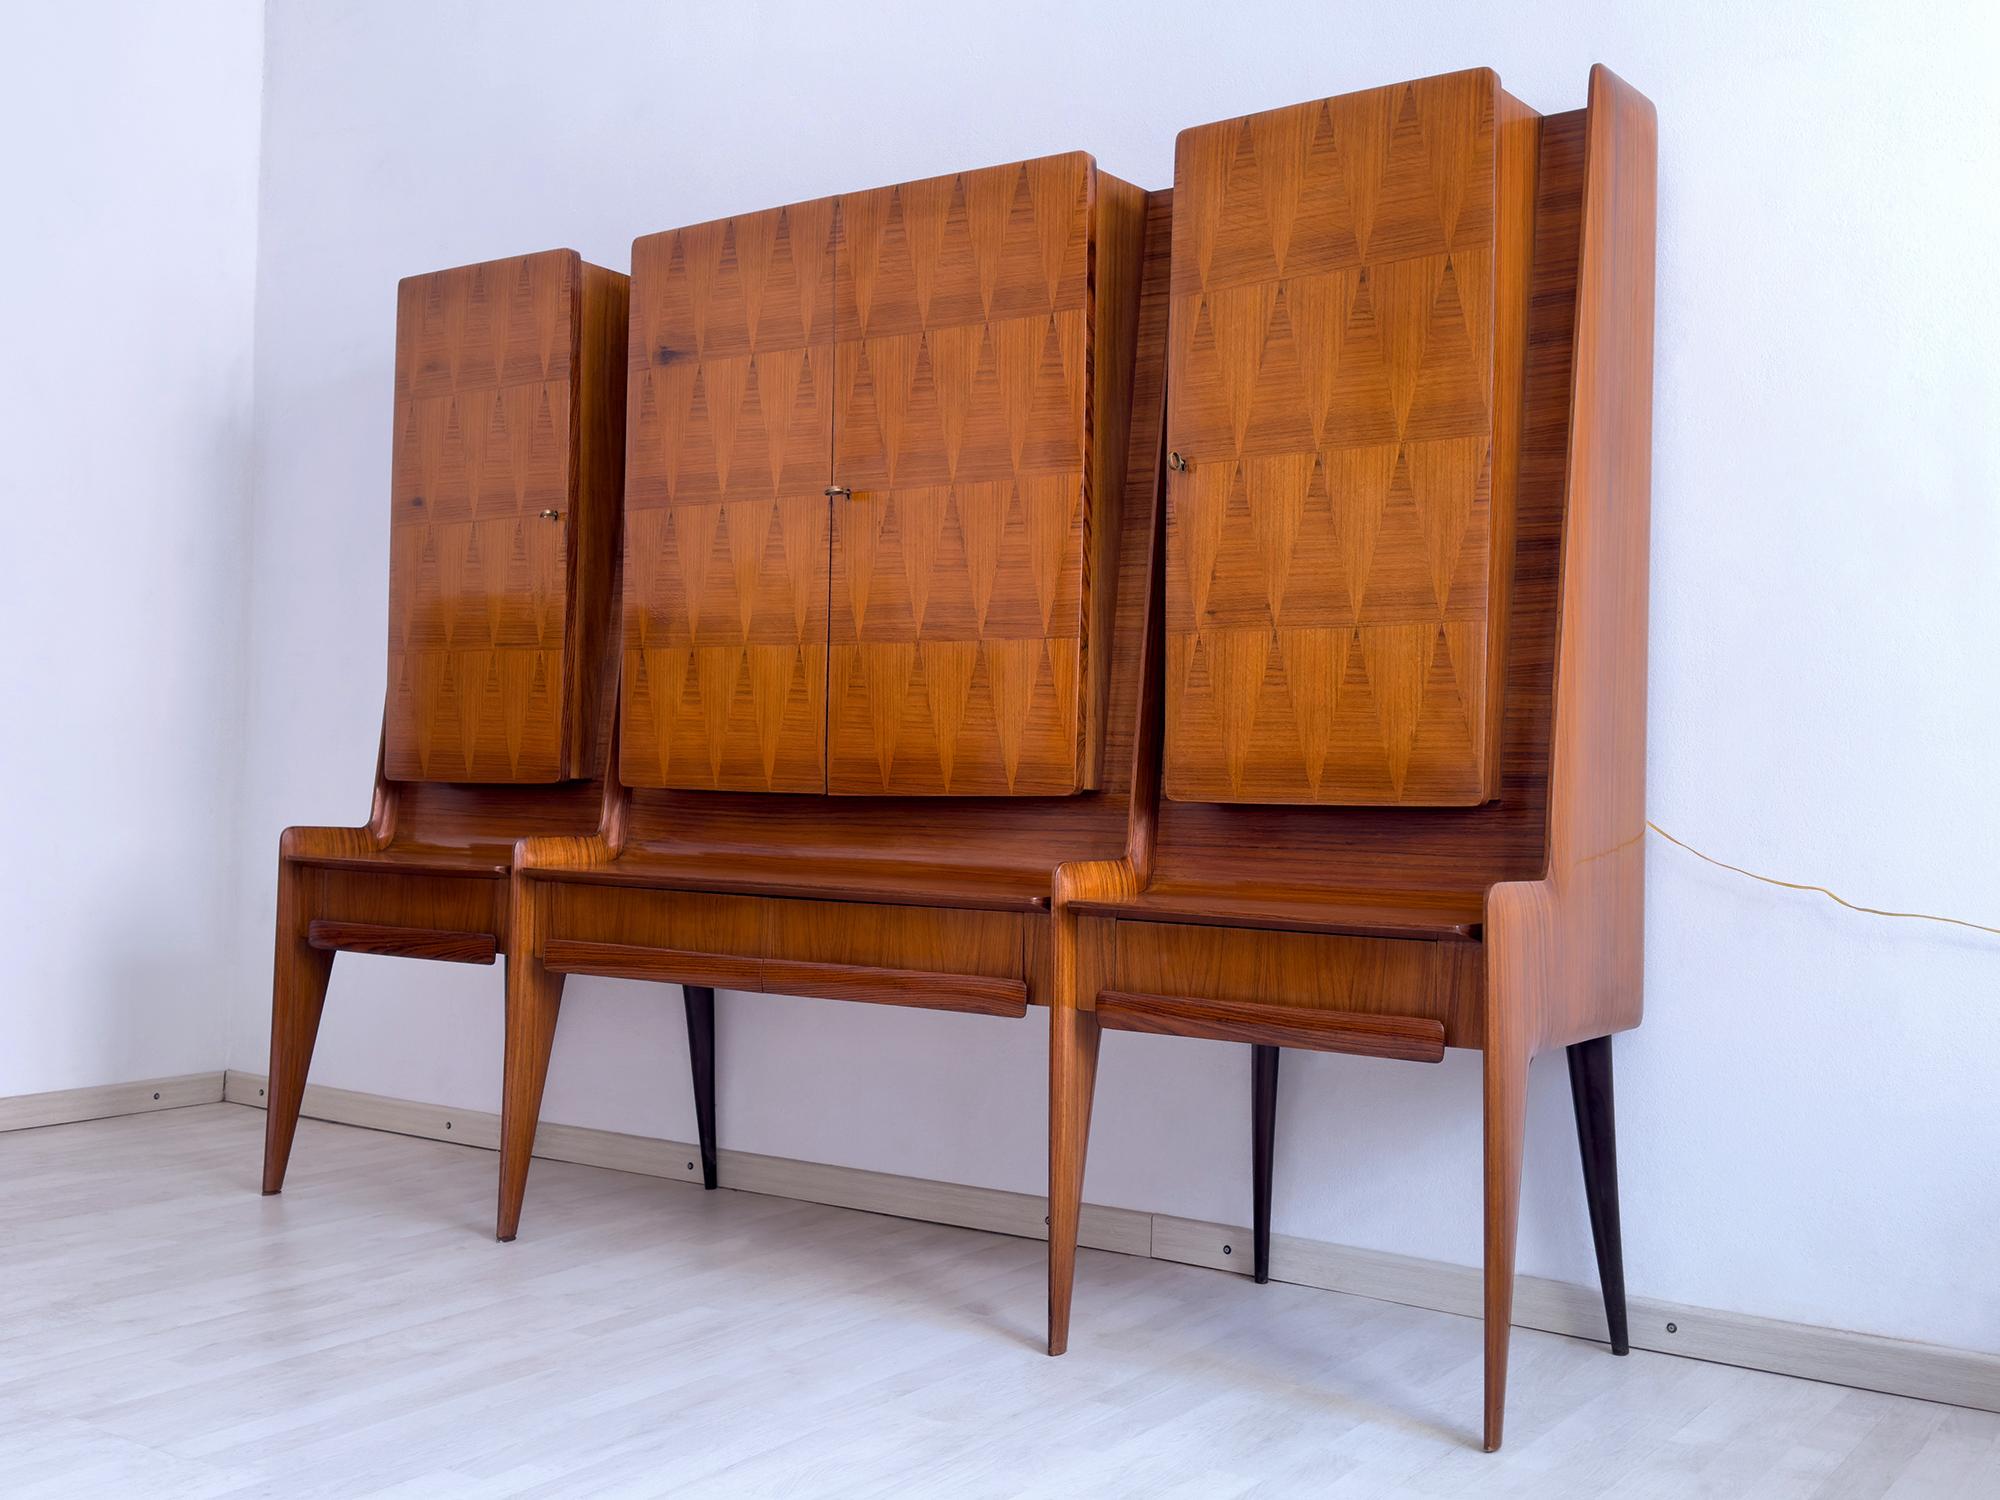 Glass Italian Mid-Century Sideboard with Dry Bar by La Permanente Mobili Cantù, 1950s